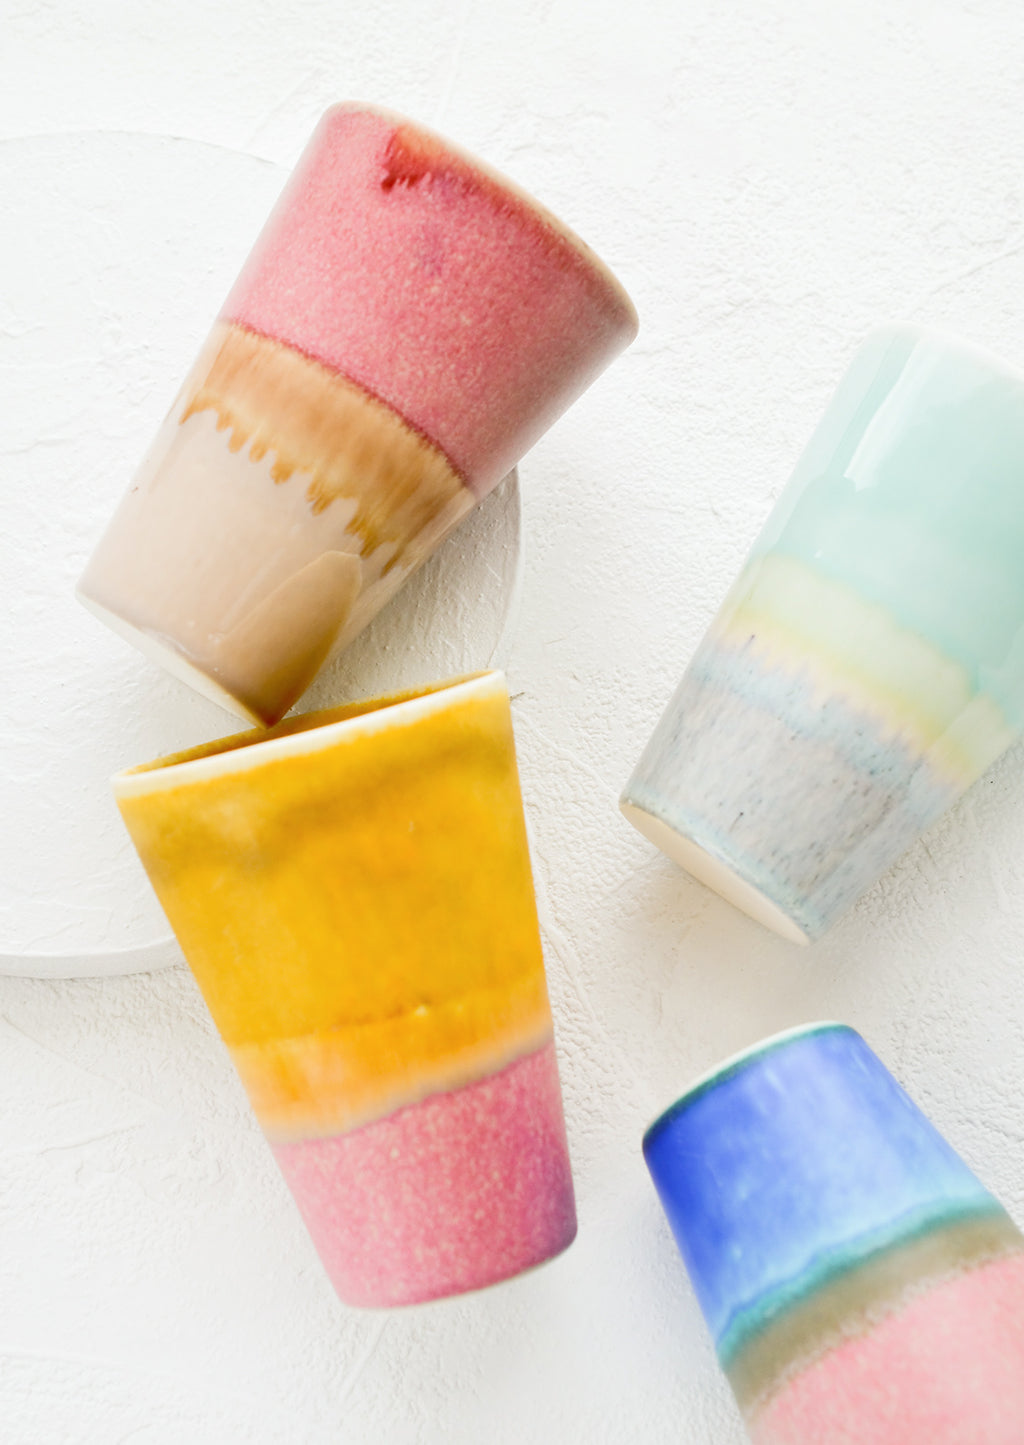 1: An assortment of colorful ceramic tumblers.